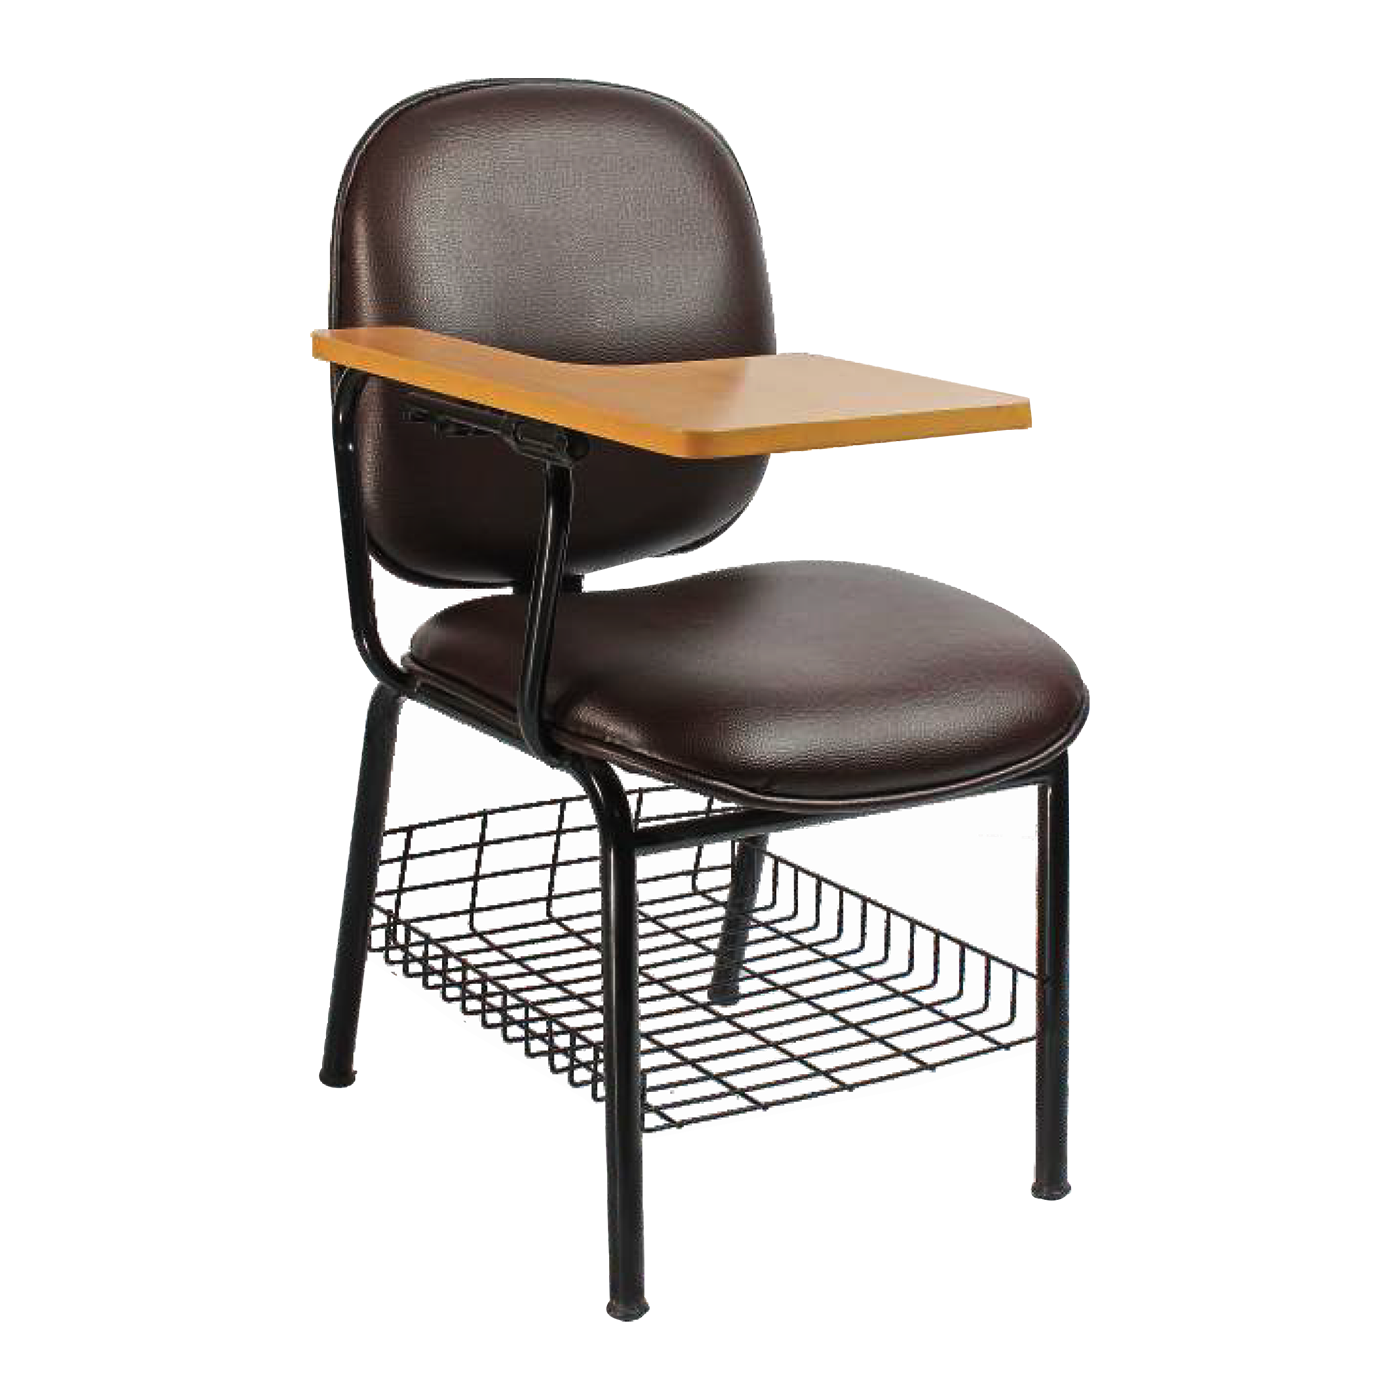 Detec™ Press Reporter Chair With movable Desk 14 gauge CRC pipe in cushioned Brown Color